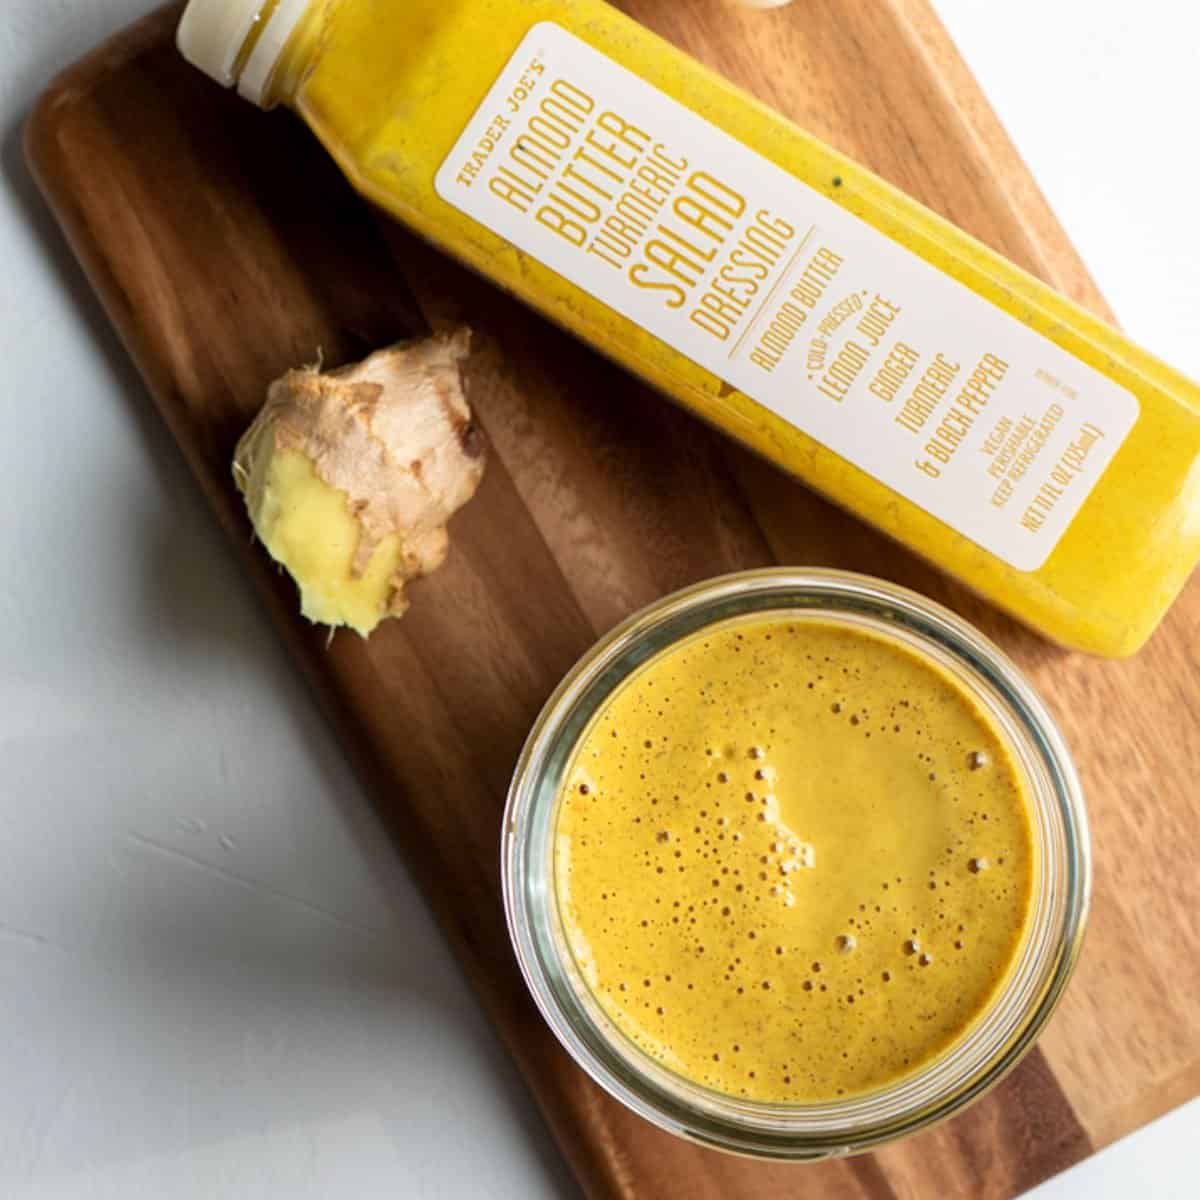 golden-colored salad dressing in a jar with a bottle of Trader Joe's dressing nearby.